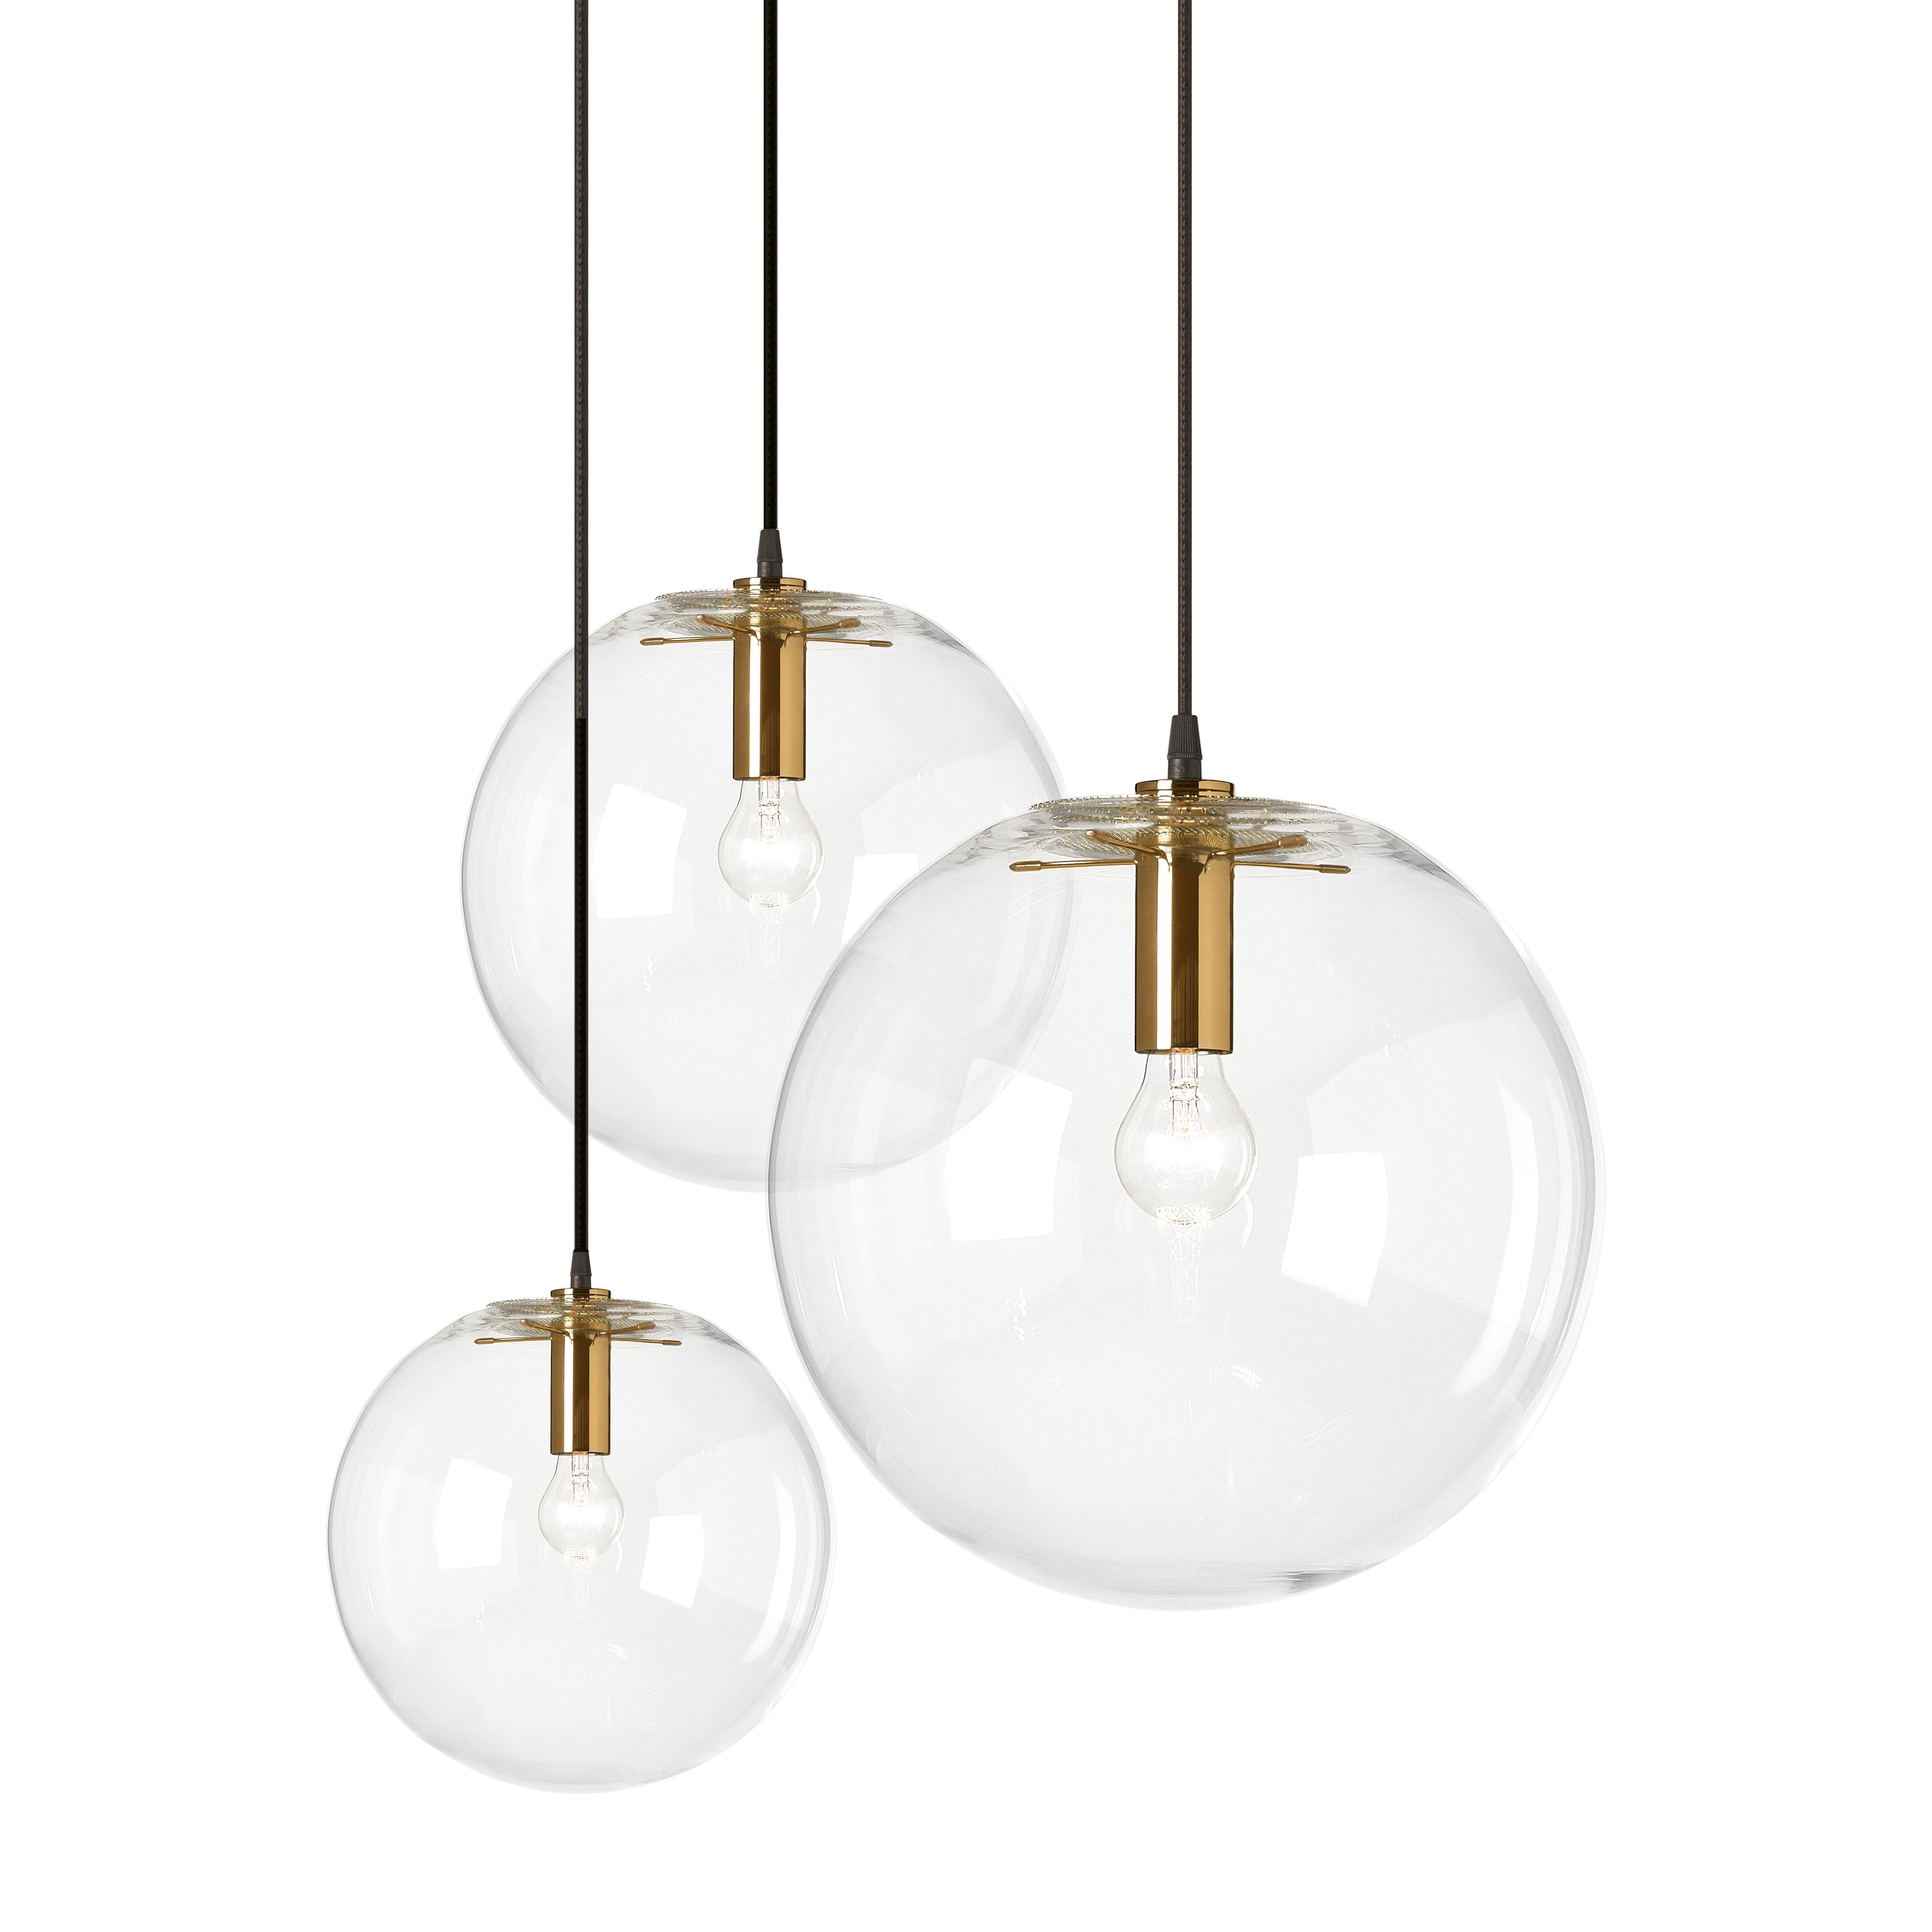 Hand blown clear crystal glass sphere. Centrally suspended by a five-armed light head. Insect protection cover and light head in metal, brass-plated. Black fabric covered wire.

UL version 110 V:
Max. 60 W / 110 V
Socket E 26

Dimensions: W 20